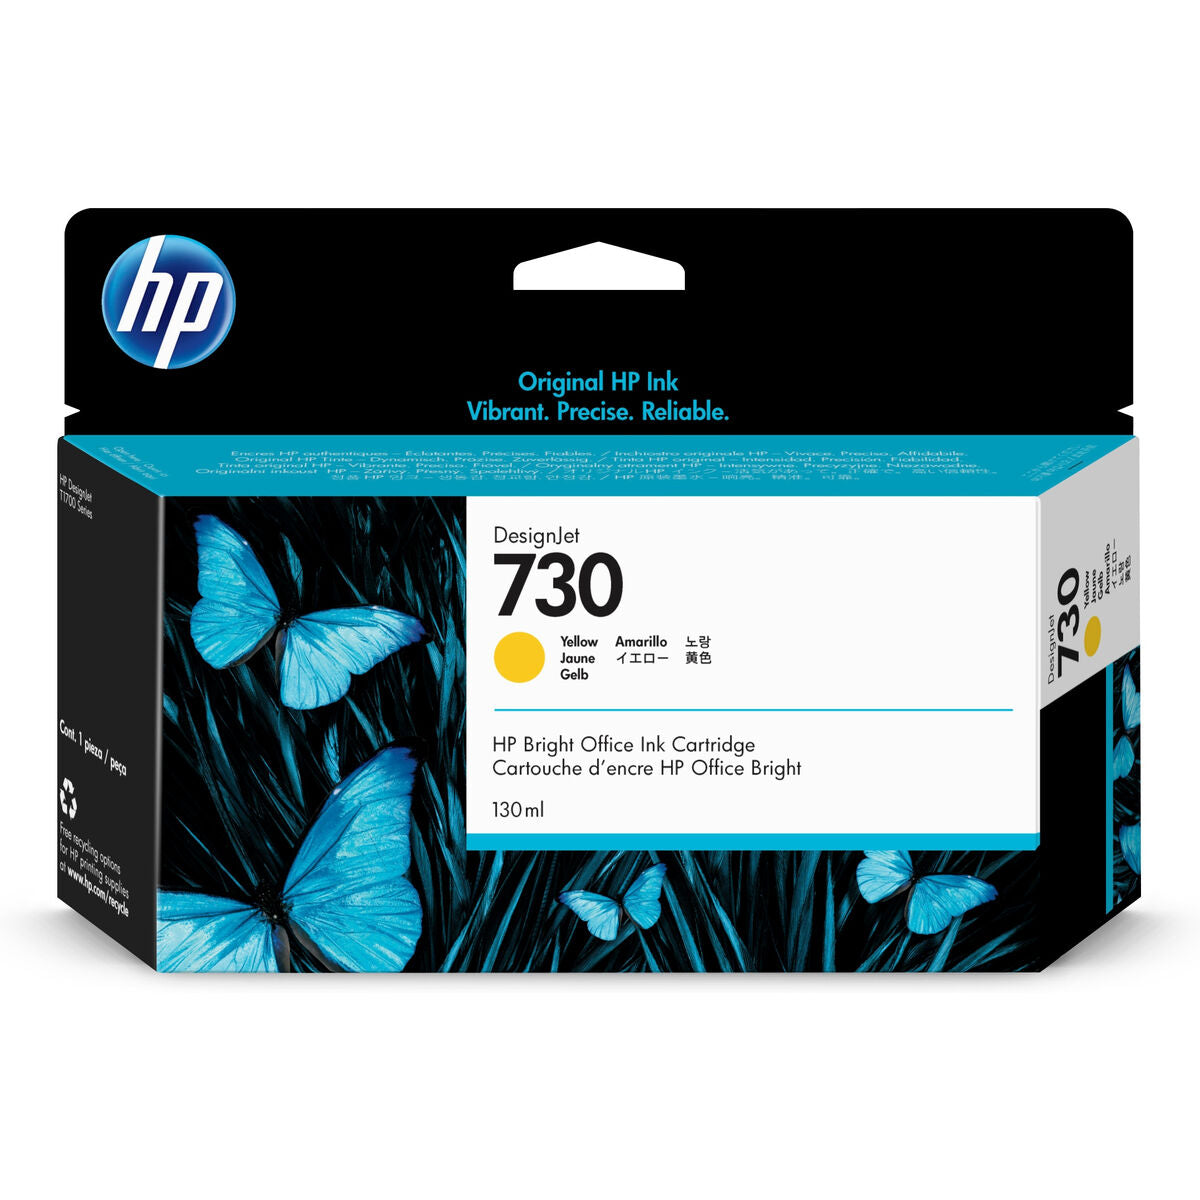 Original Ink Cartridge HP P2V64A Yellow Black, HP, Computing, Printers and accessories, original-ink-cartridge-hp-p2v64a-yellow-black-1, Brand_HP, category-reference-2609, category-reference-2642, category-reference-2874, category-reference-t-19685, category-reference-t-19911, category-reference-t-21377, category-reference-t-25688, category-reference-t-29848, Condition_NEW, office, Price_100 - 200, Teleworking, RiotNook